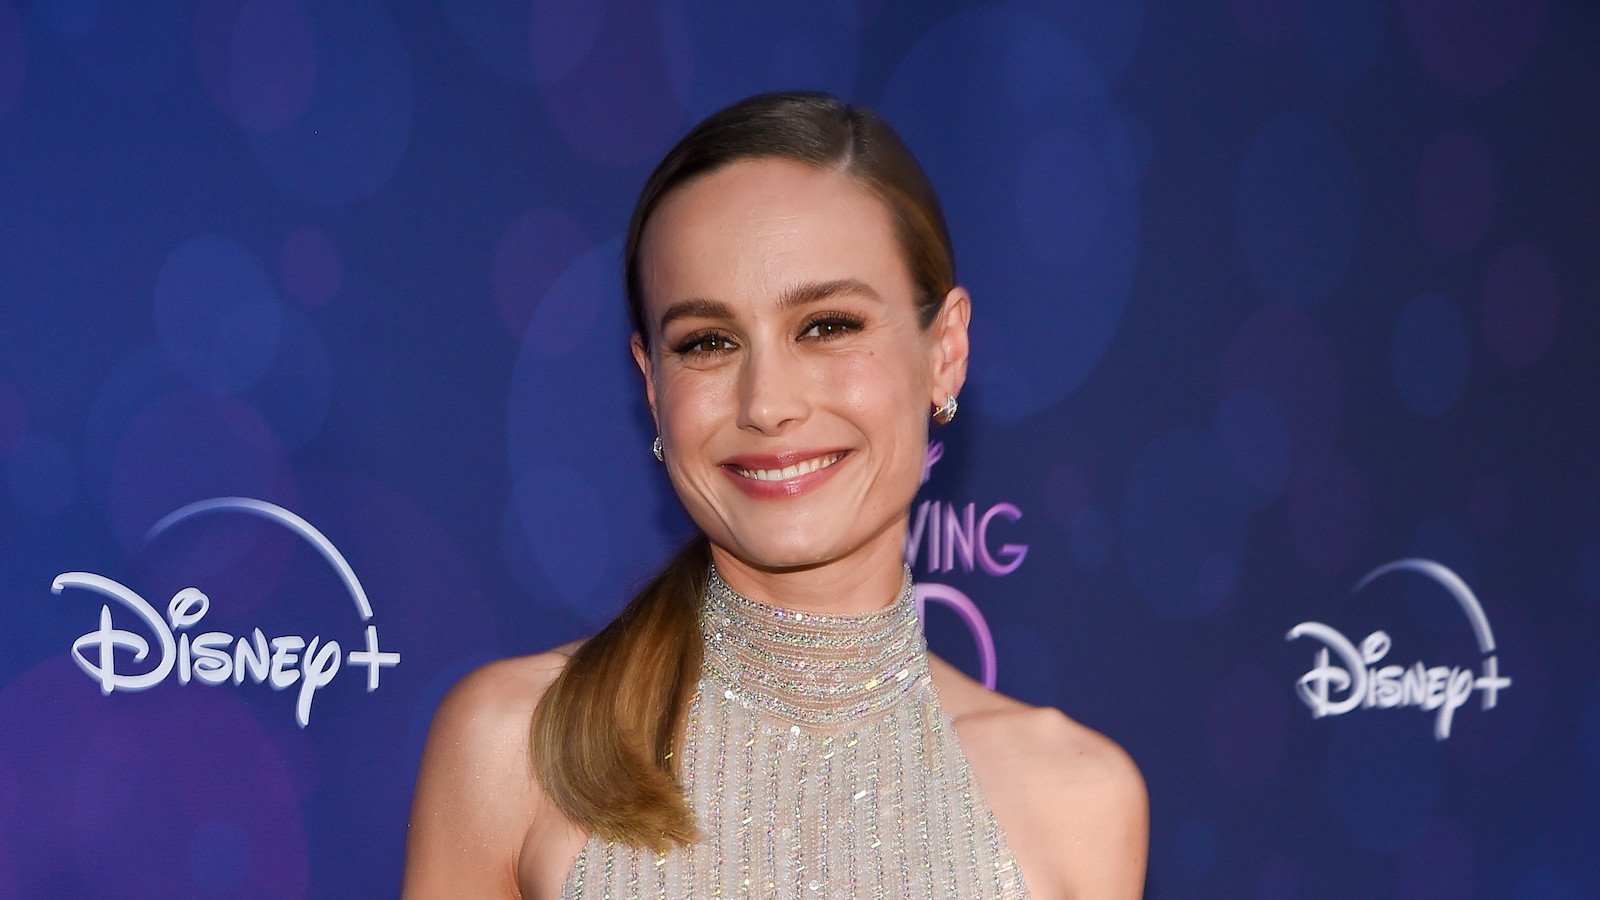 Brie Larson Rocks Stunning Sheer Look At The Premiere For Her New Disney Plus Series Techno